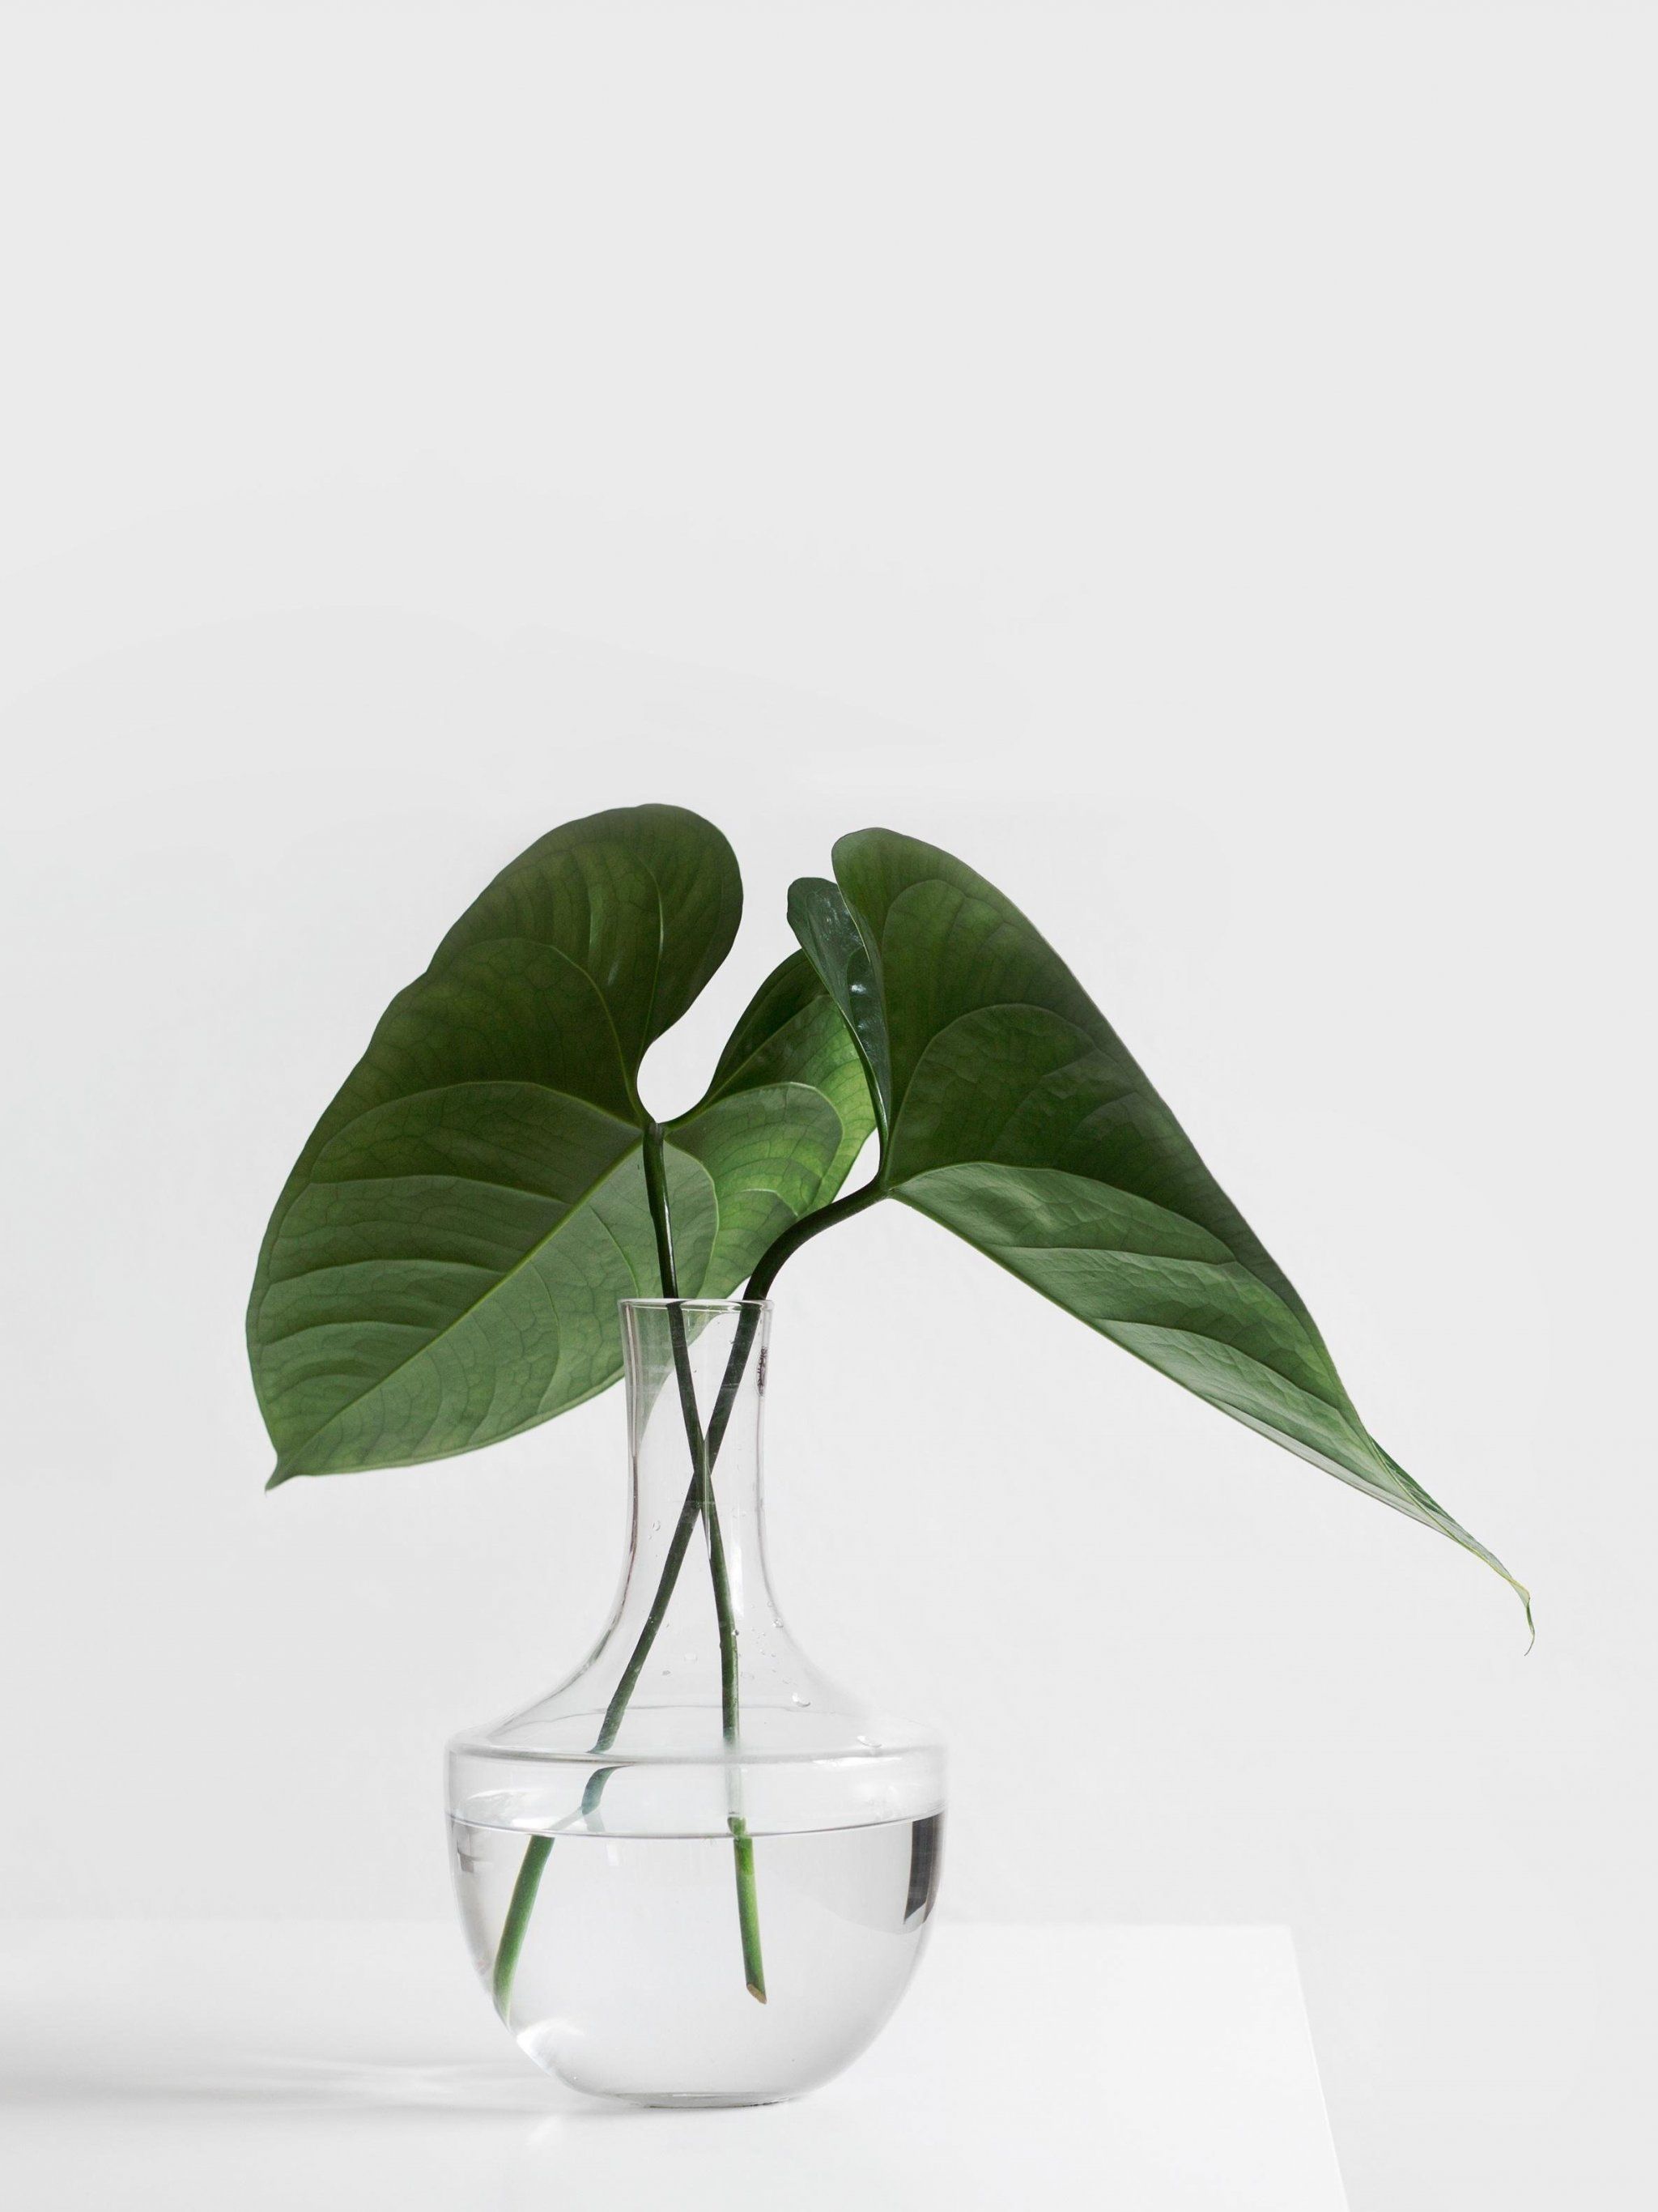 Minimalist Aesthetic Plant in Clear Vase Wallpaper, Android & Desktop Background